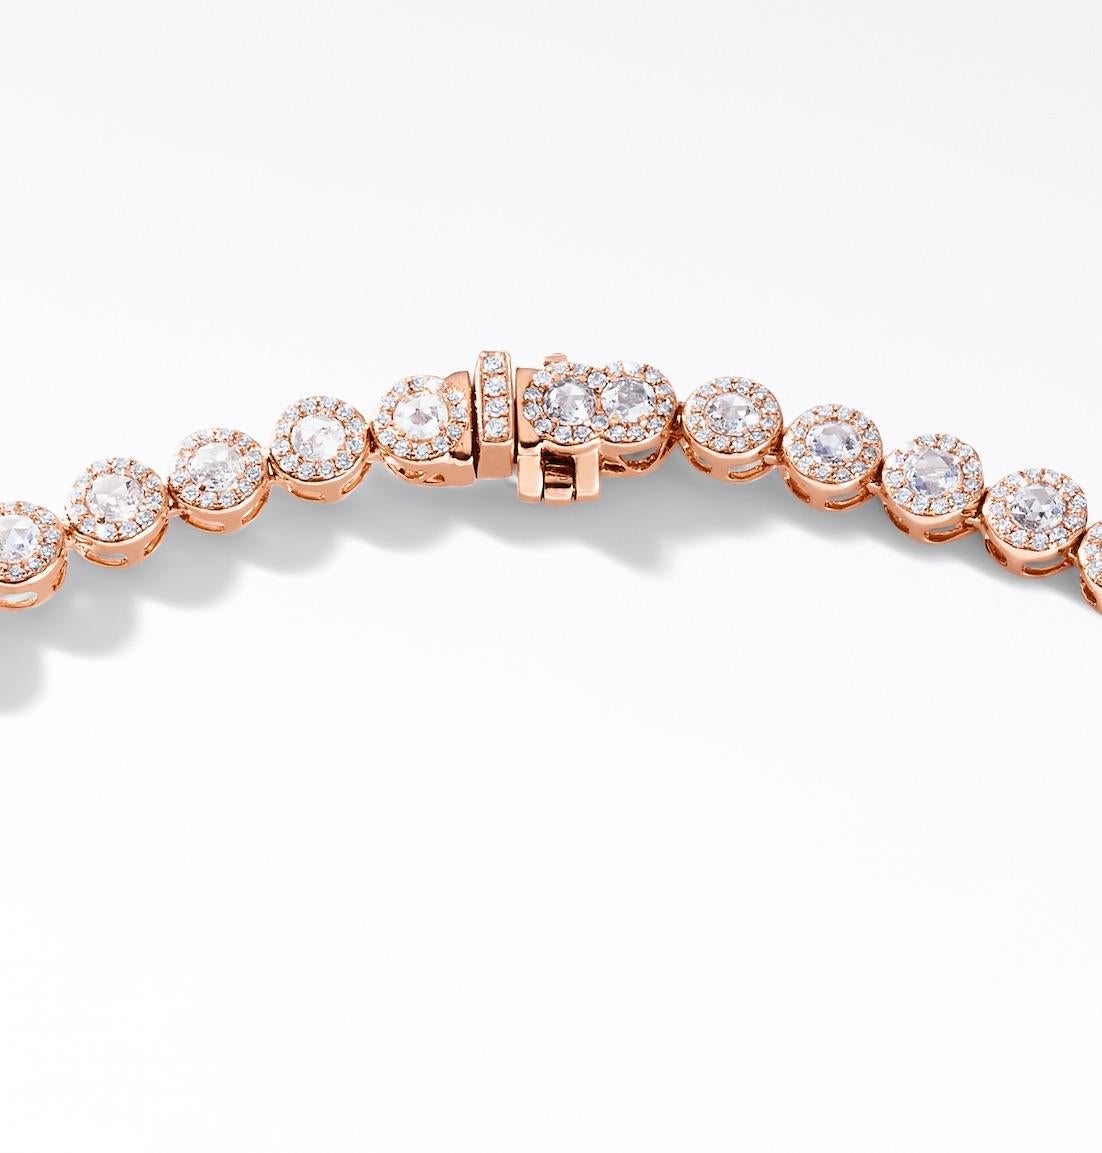 64Facets 9 Carat Rose Cut Diamond Necklace with Pave Accents in Rose Gold For Sale 2